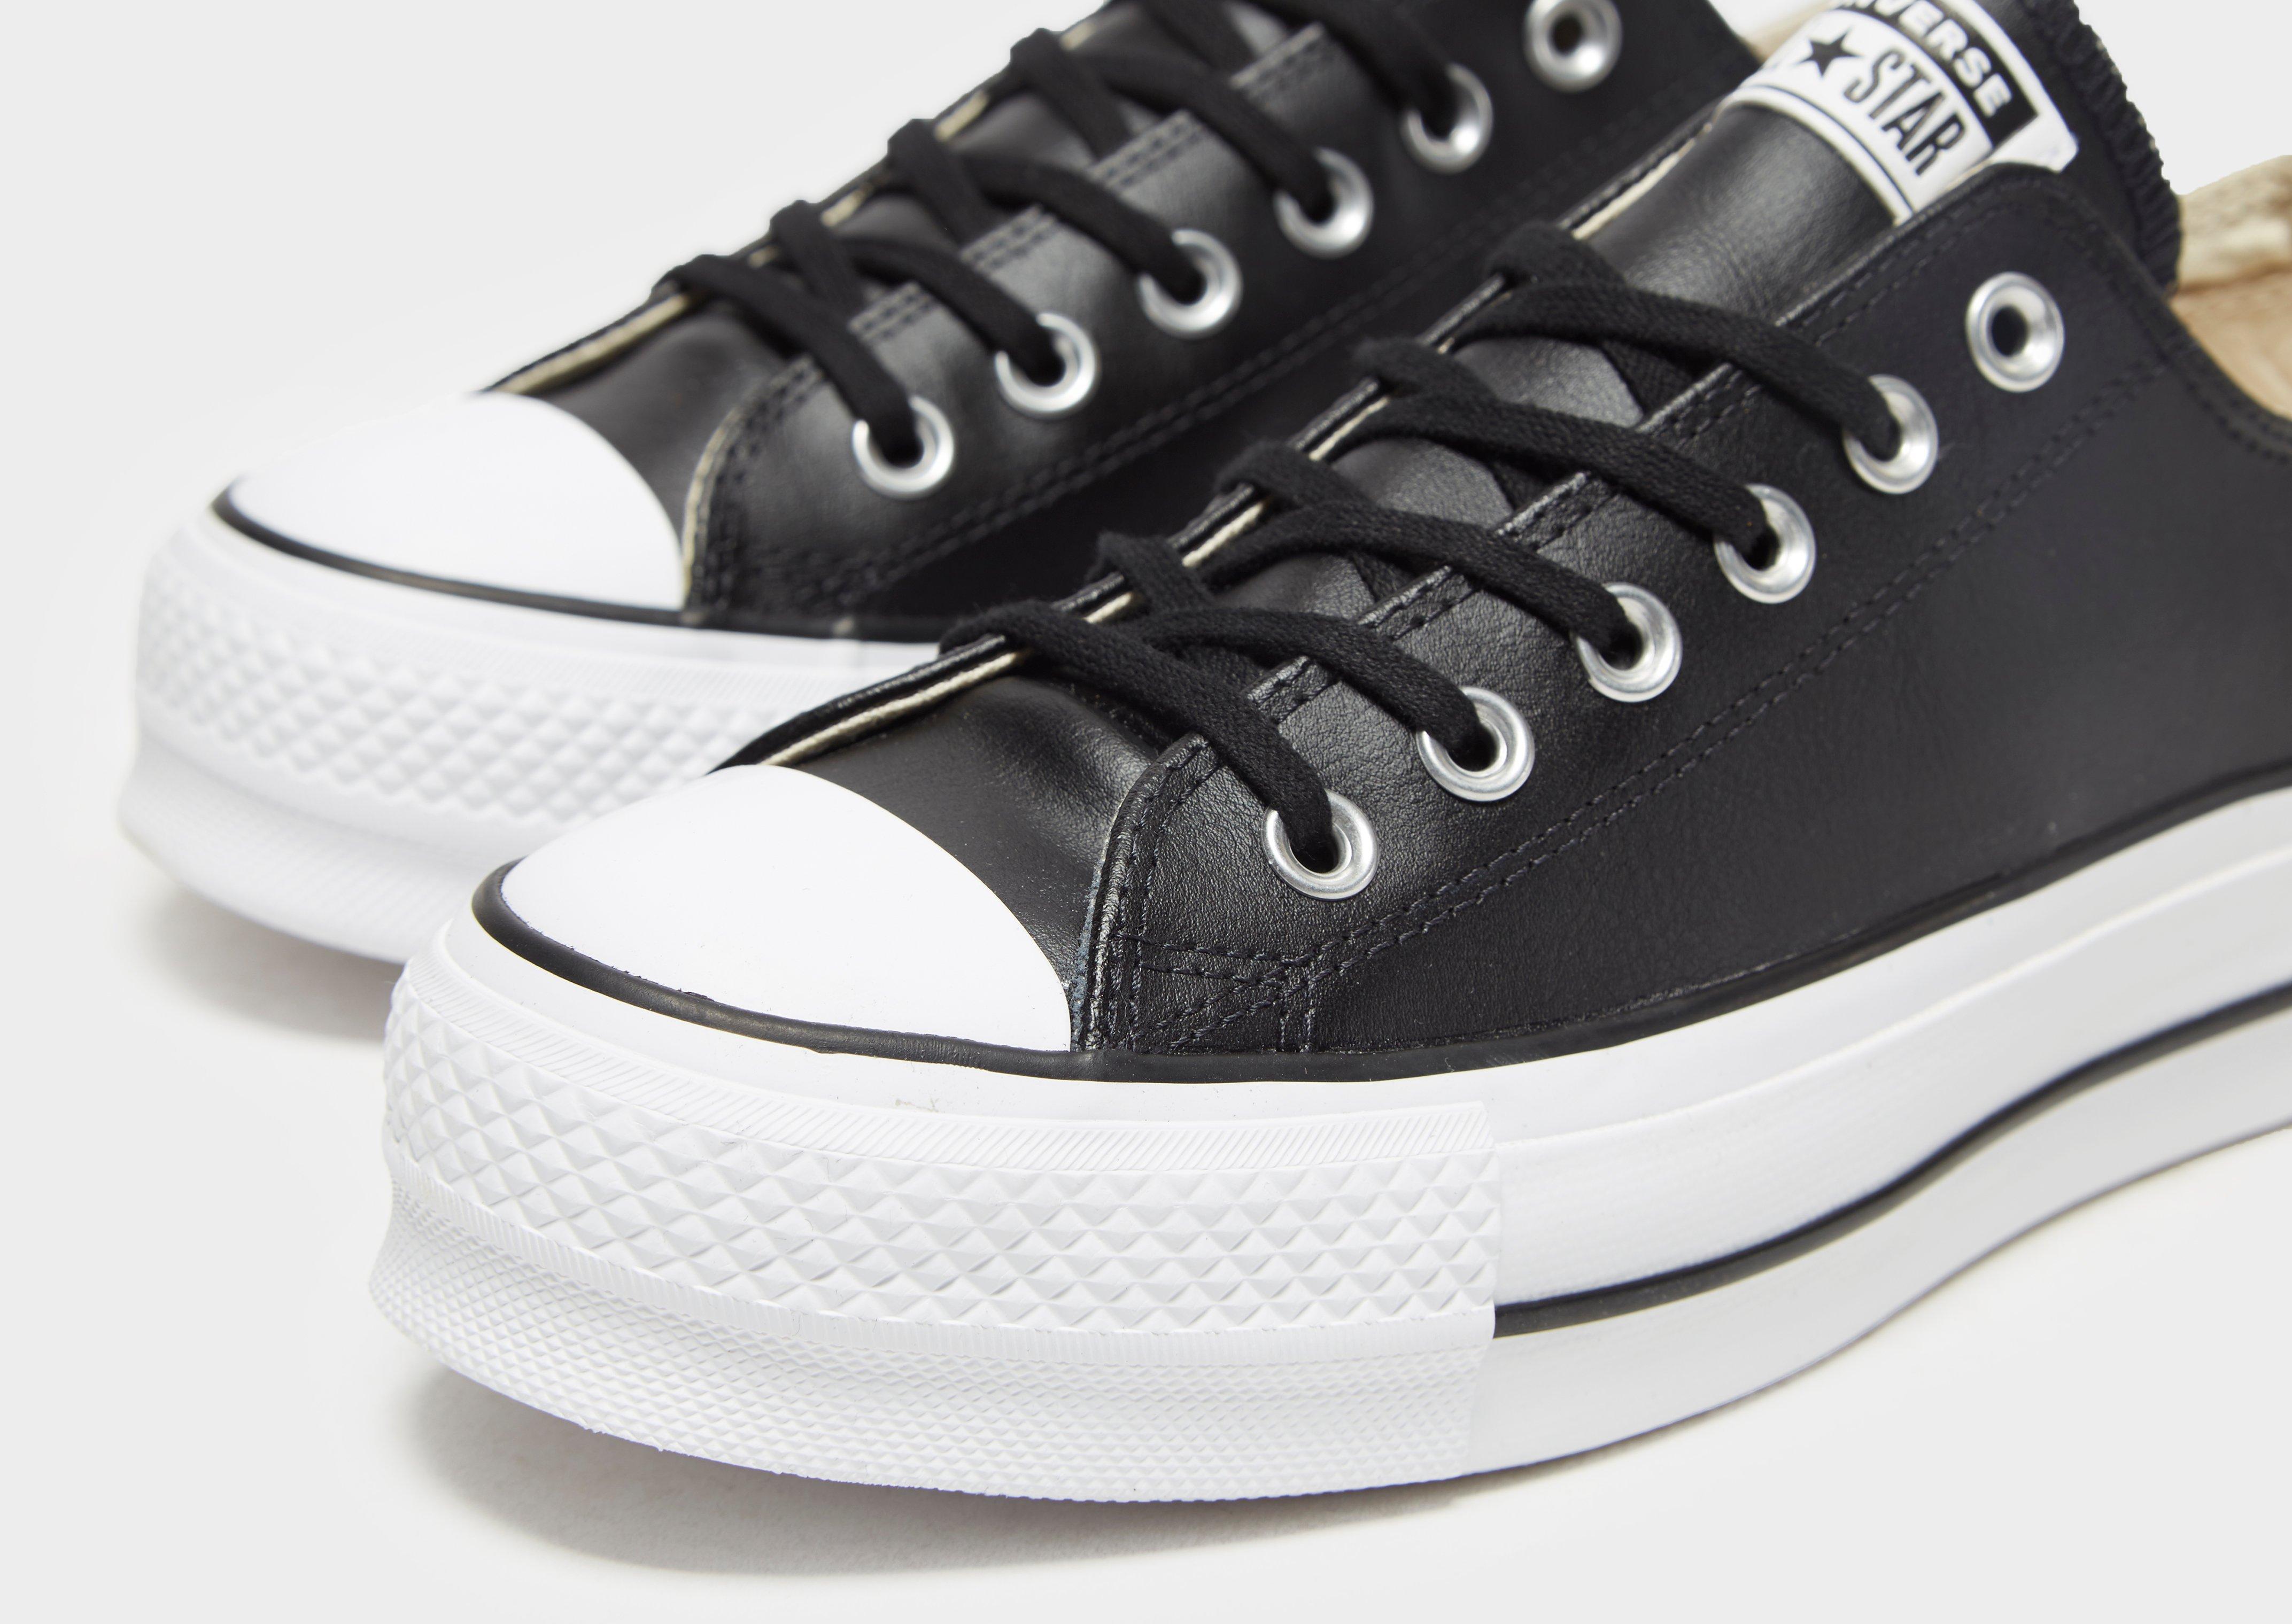 Converse Leather All Star Lift Ox Platform in Black/White (Black) - Lyst